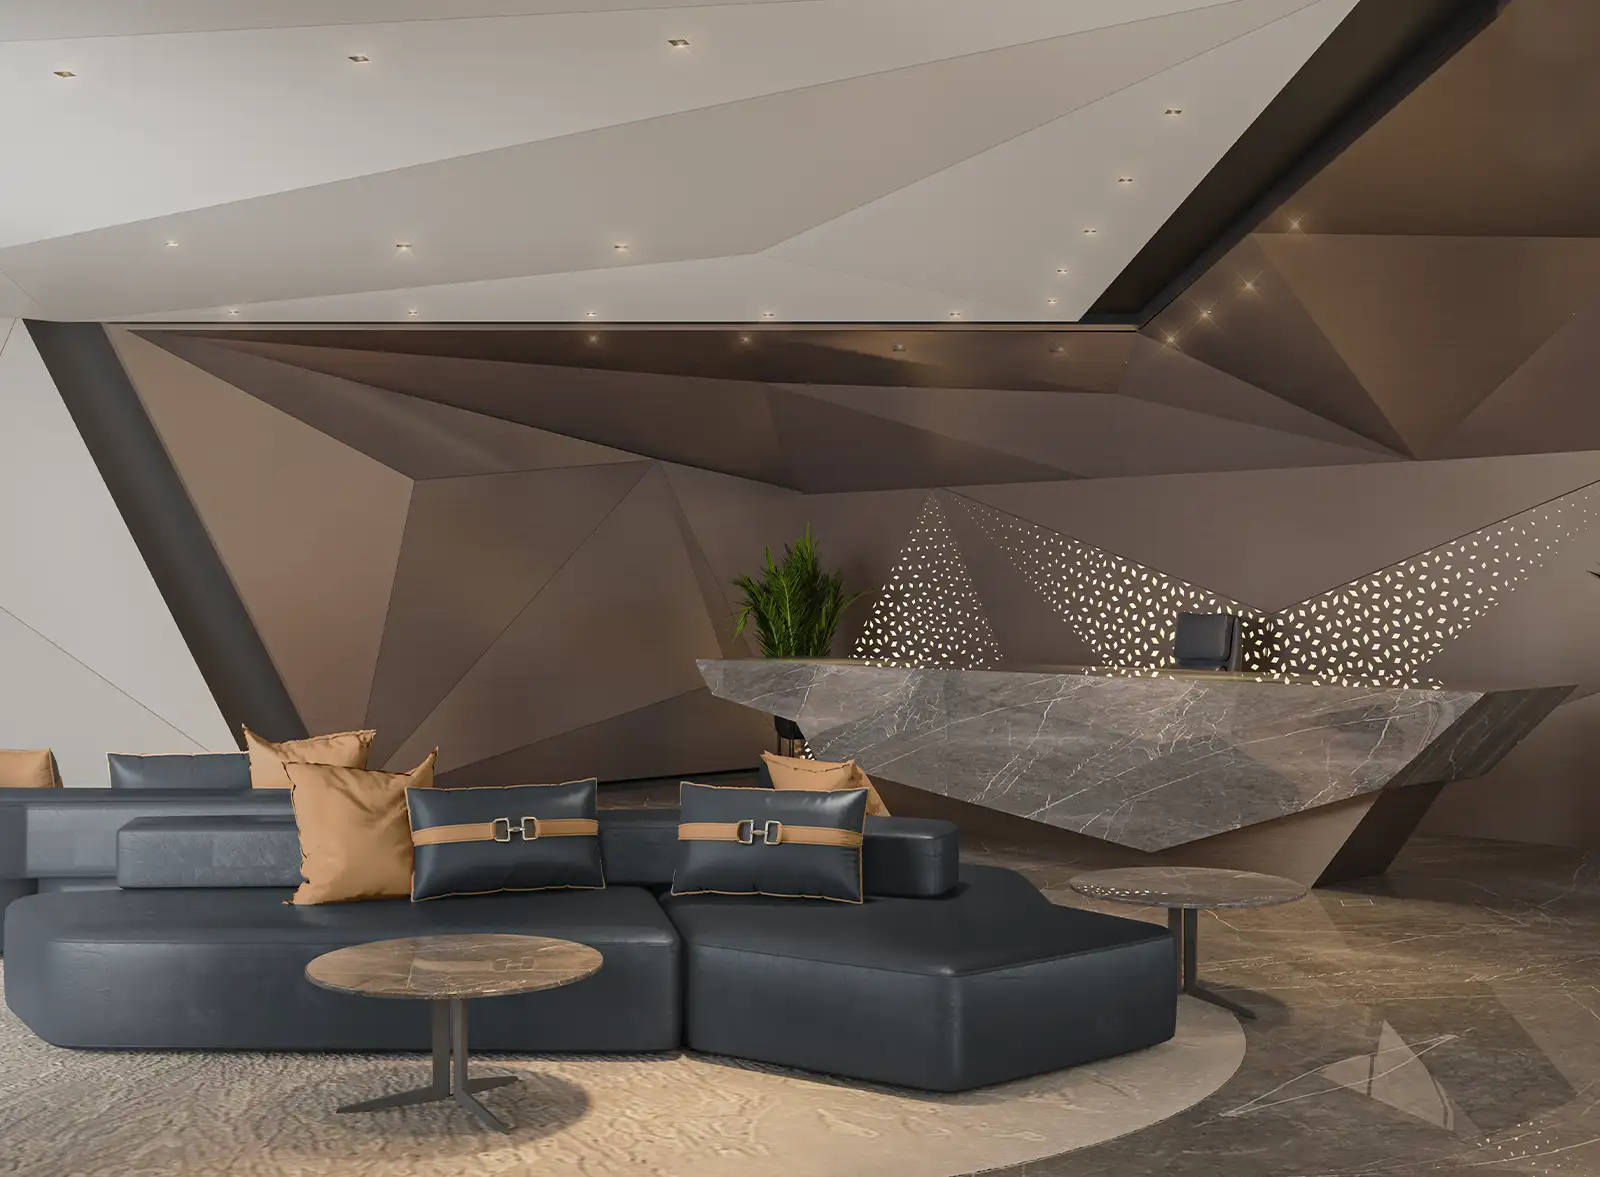 Futuristic interior design in a lounge area with geometric ceiling patterns, a sleek marble reception desk with artistic cutouts, contemporary navy modular seating with gold accent pillows, and sophisticated ambient lighting for a cutting-edge aesthetic